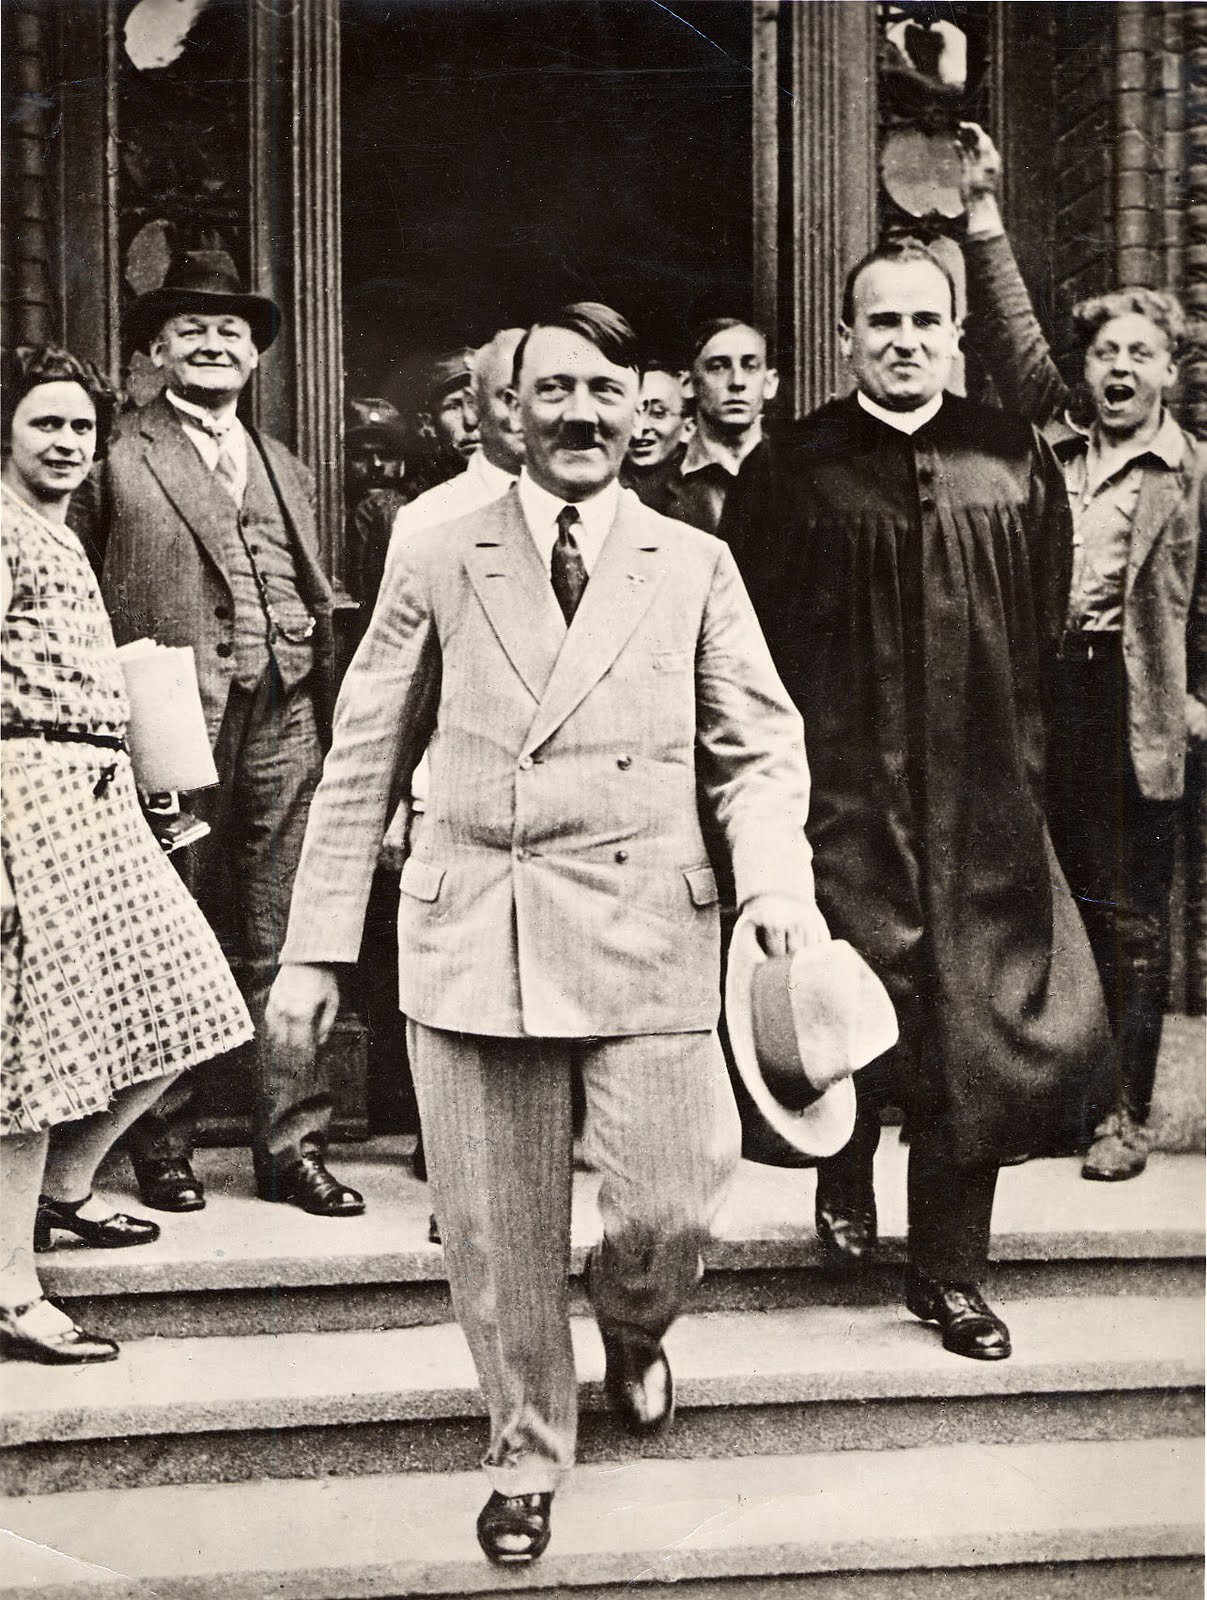 Adolf Hitler, wearing  a suit, walking down 3 steps outside of a building with a crowd of people behind him.